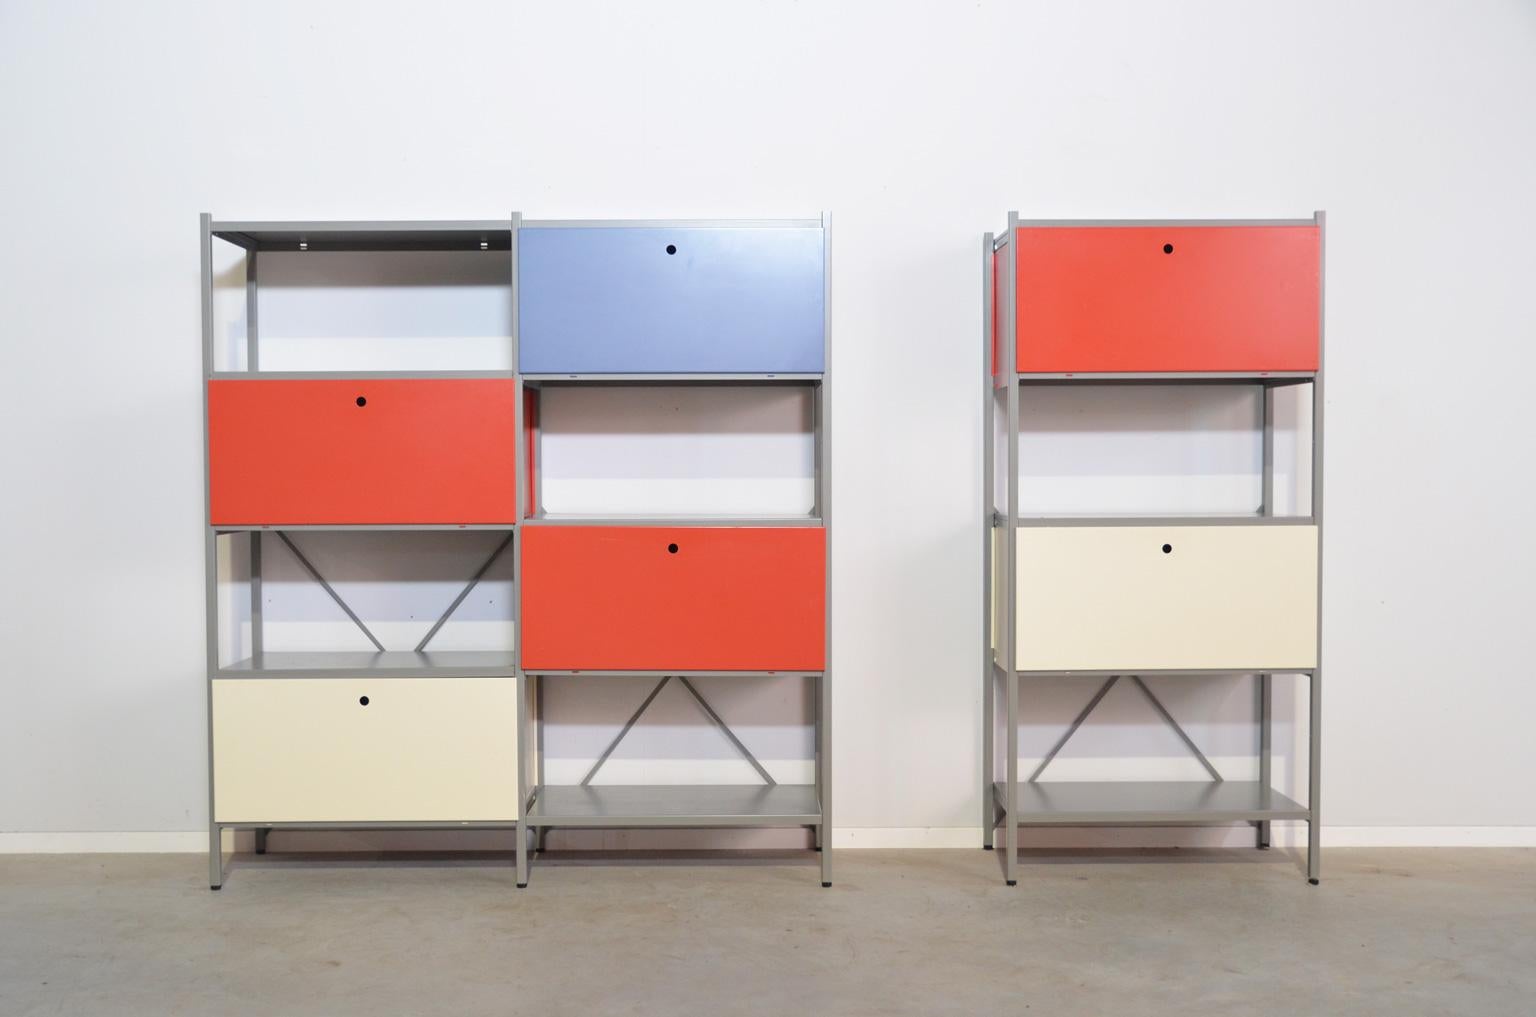 Industrial modular wall system by Wim Rietveld for Gispen originally designed in 1954. These units are a re-edition dated 1990s. Two units, one with four closed cabinets (blue, red and white) and the other one with two closed cabinets (white and